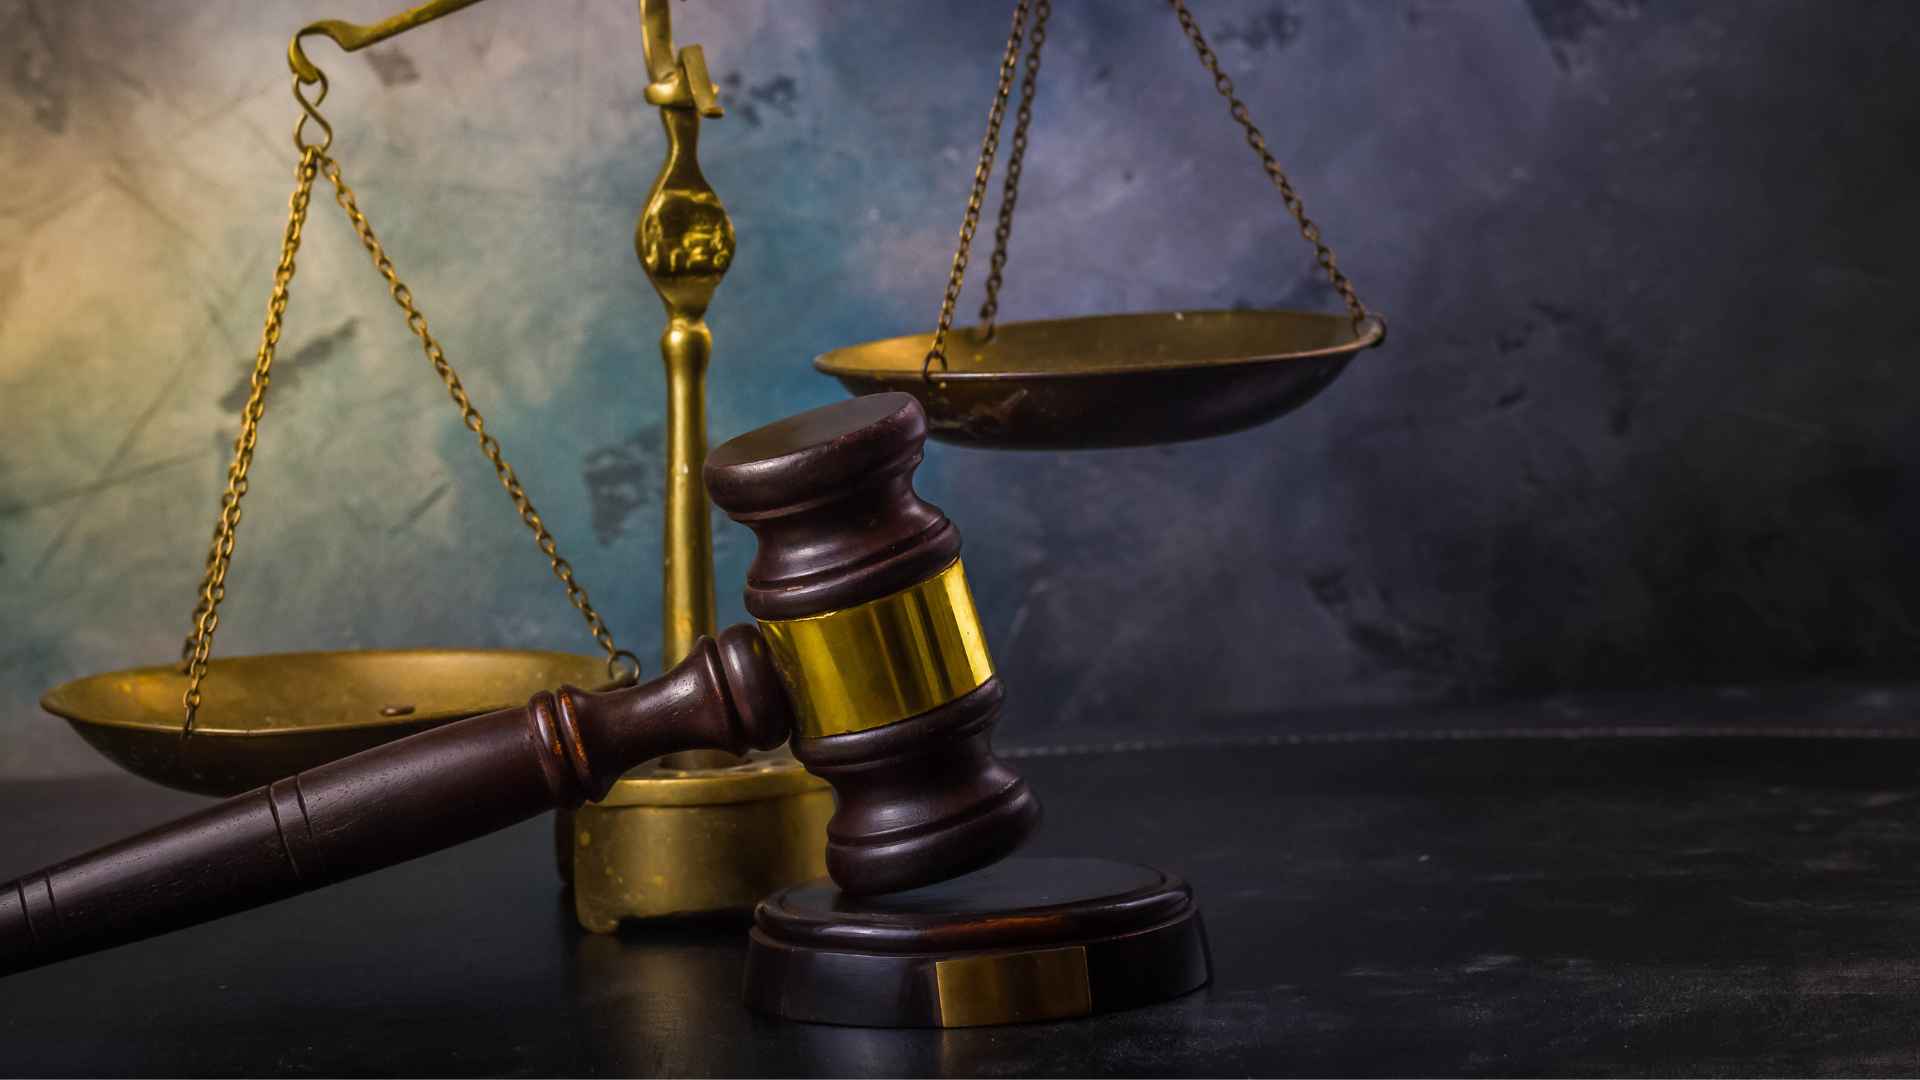 Image of scales and a gavel